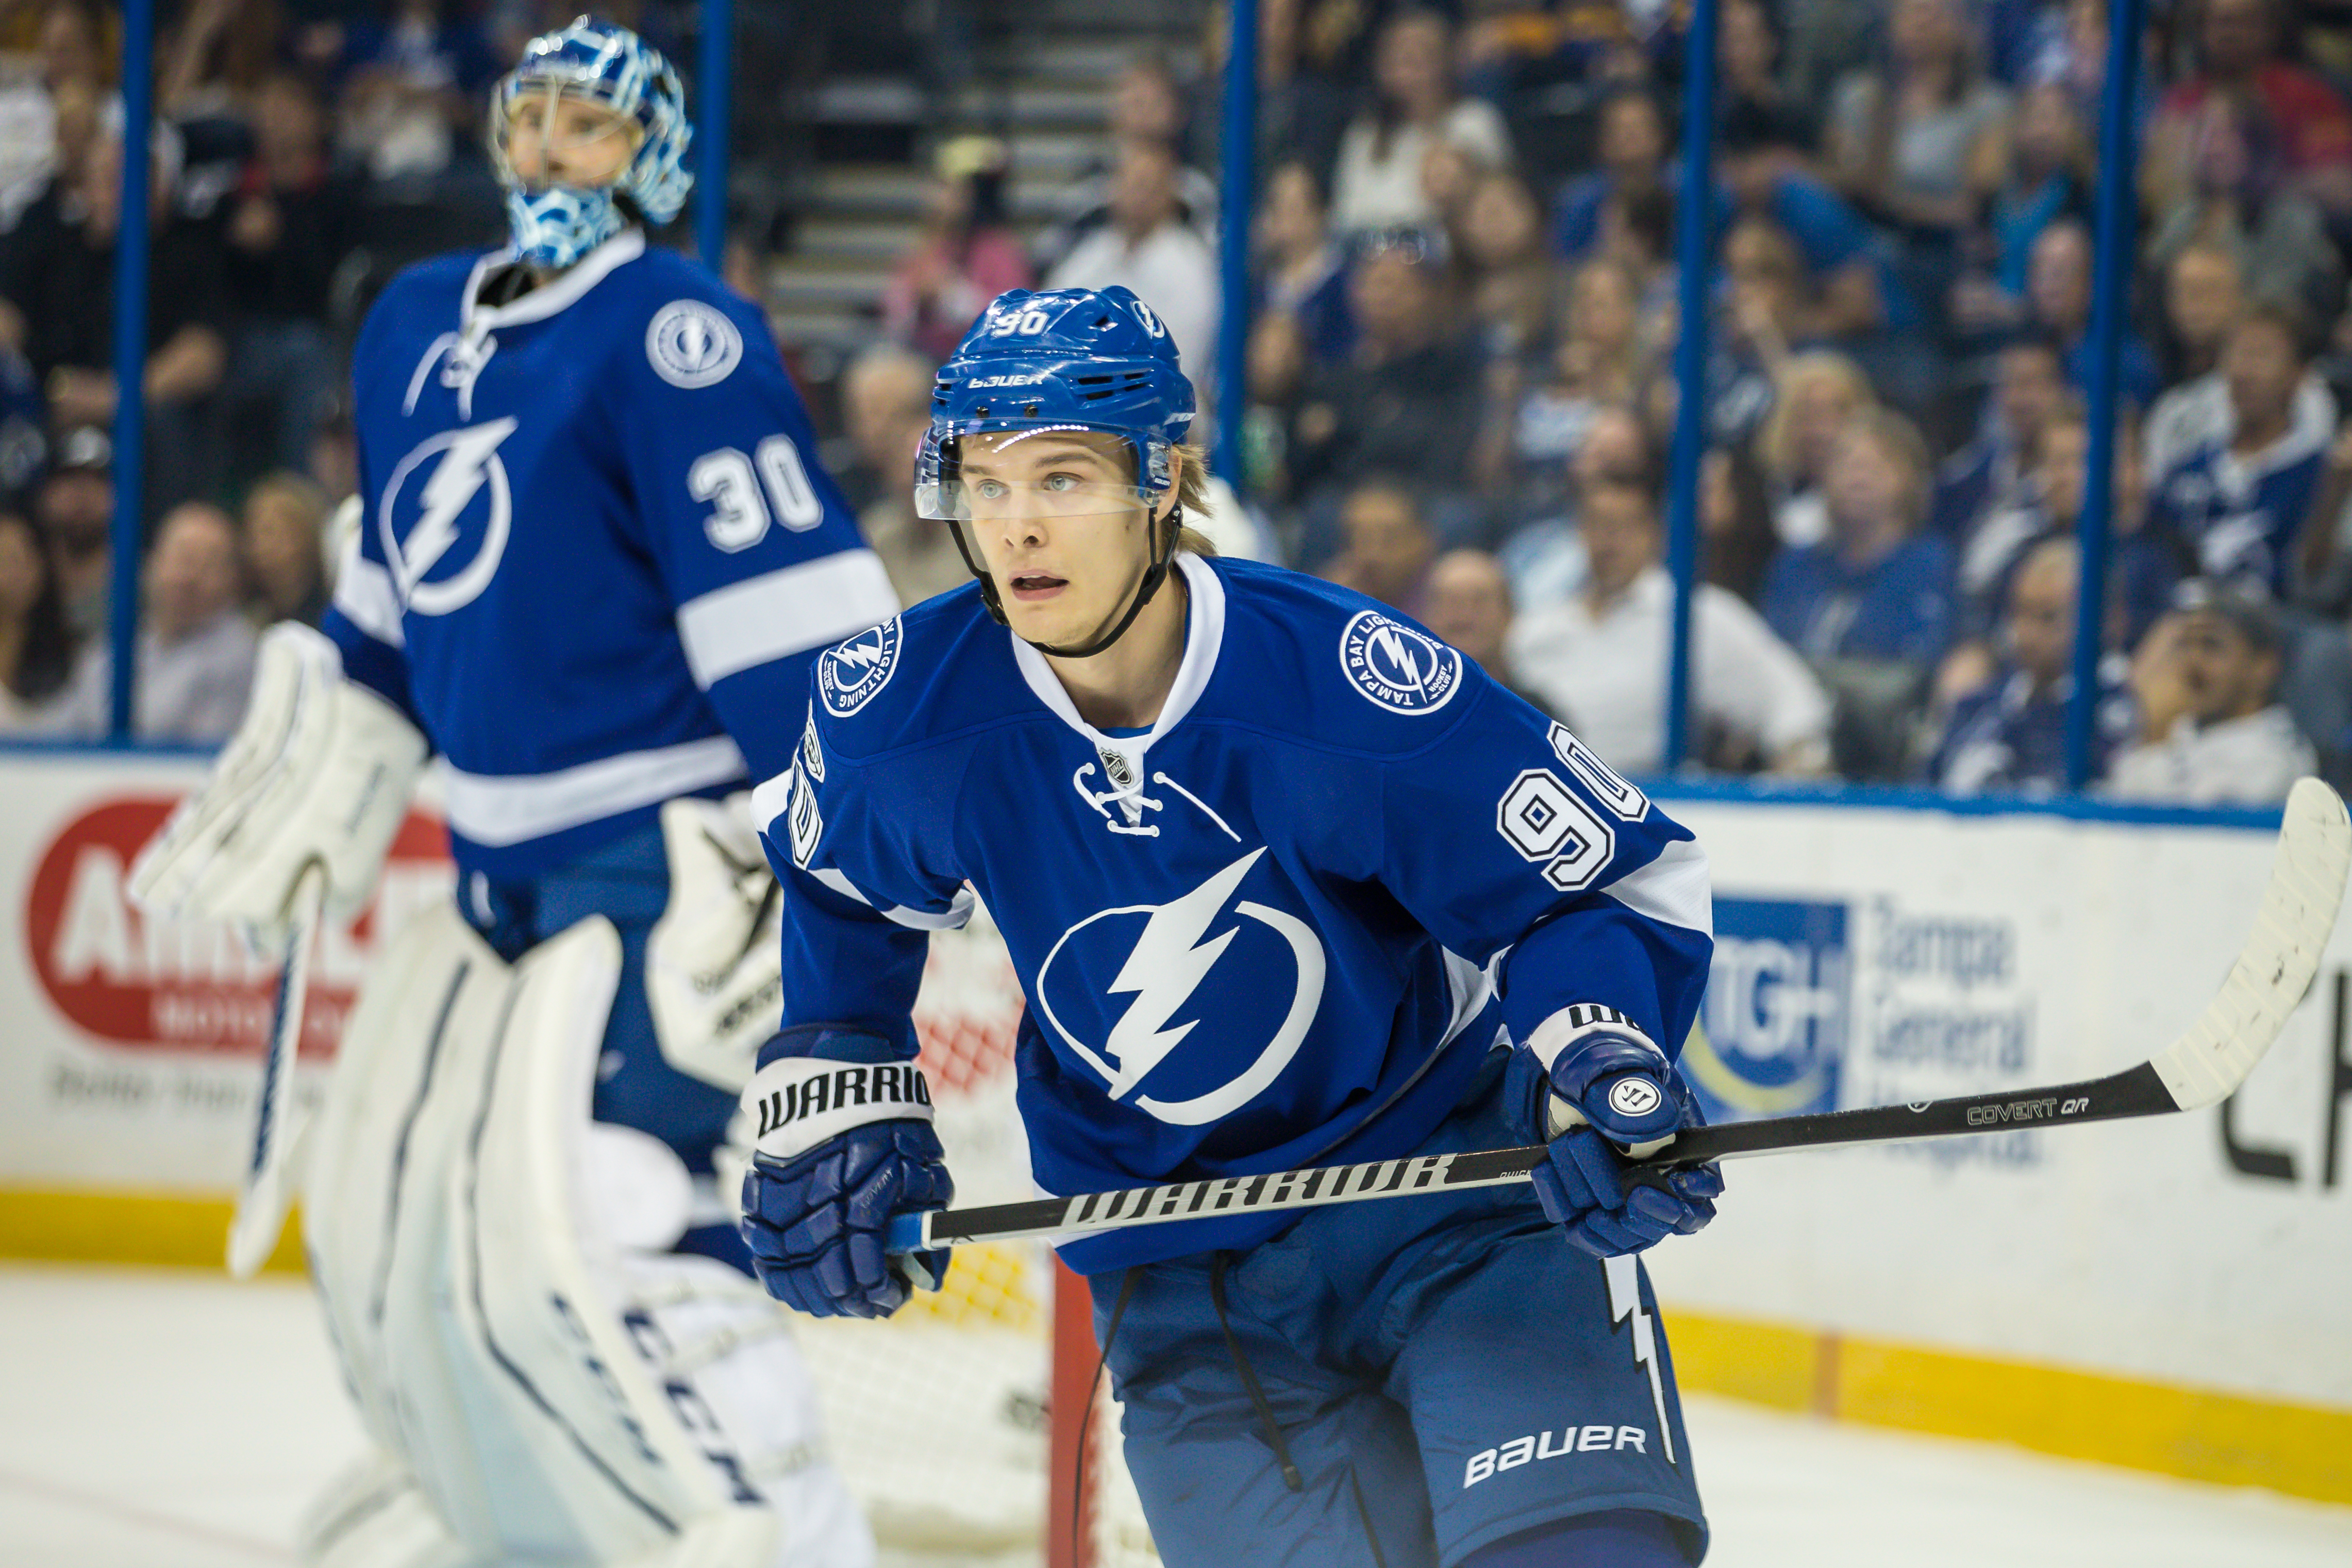 Namestnikov scored his ninth goal to give the Bolts an early lead.TRAVIS PENDERGRASS